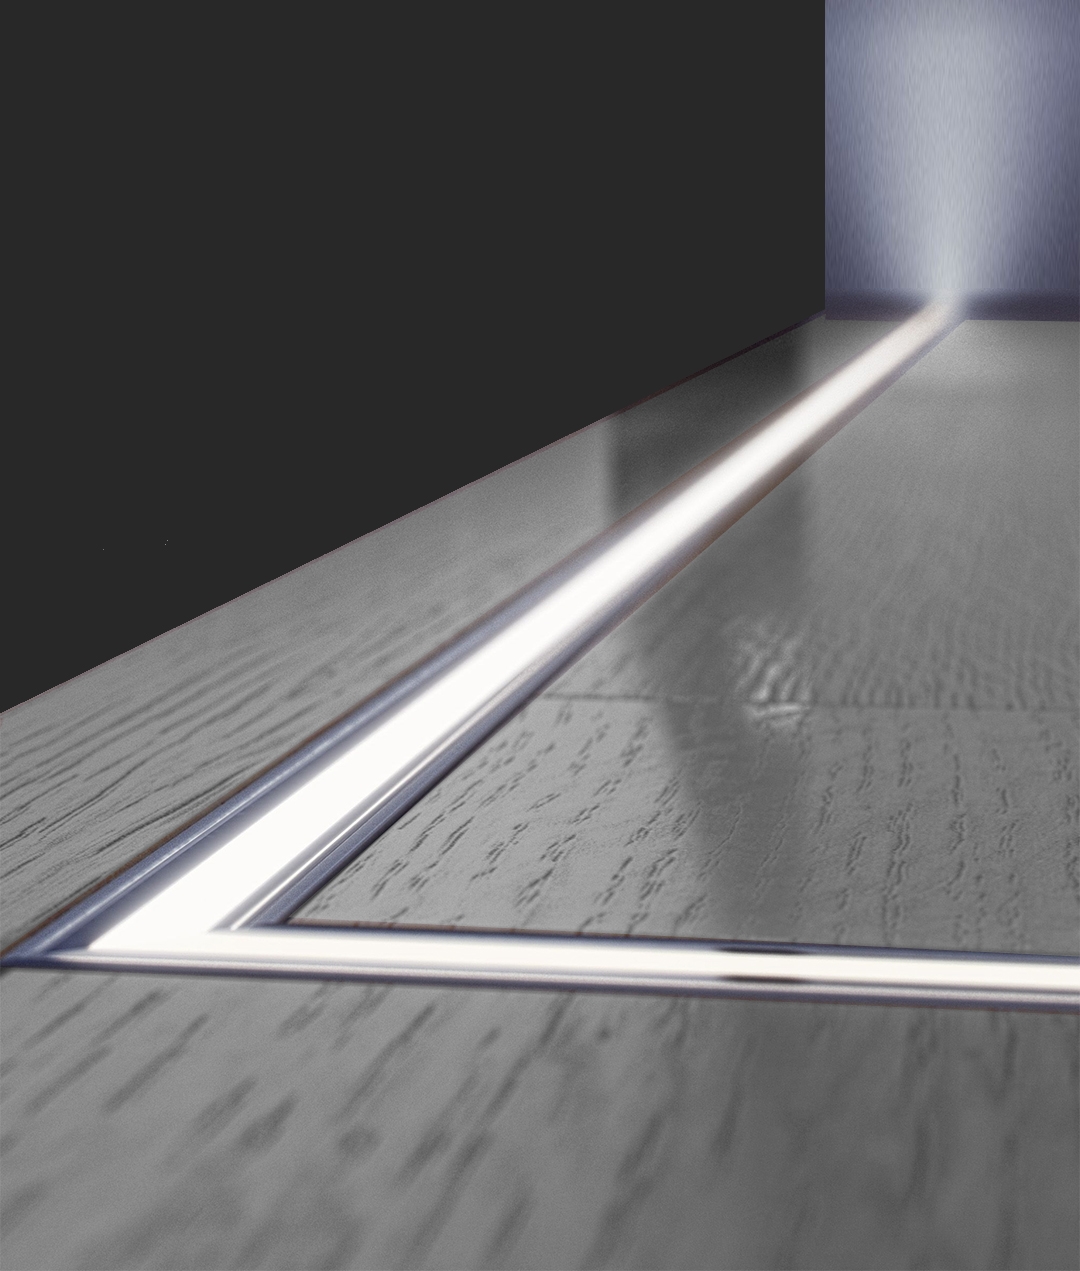 This LED profile is designed for use in enough for foot traffic in High domestic and medium commercial spaces